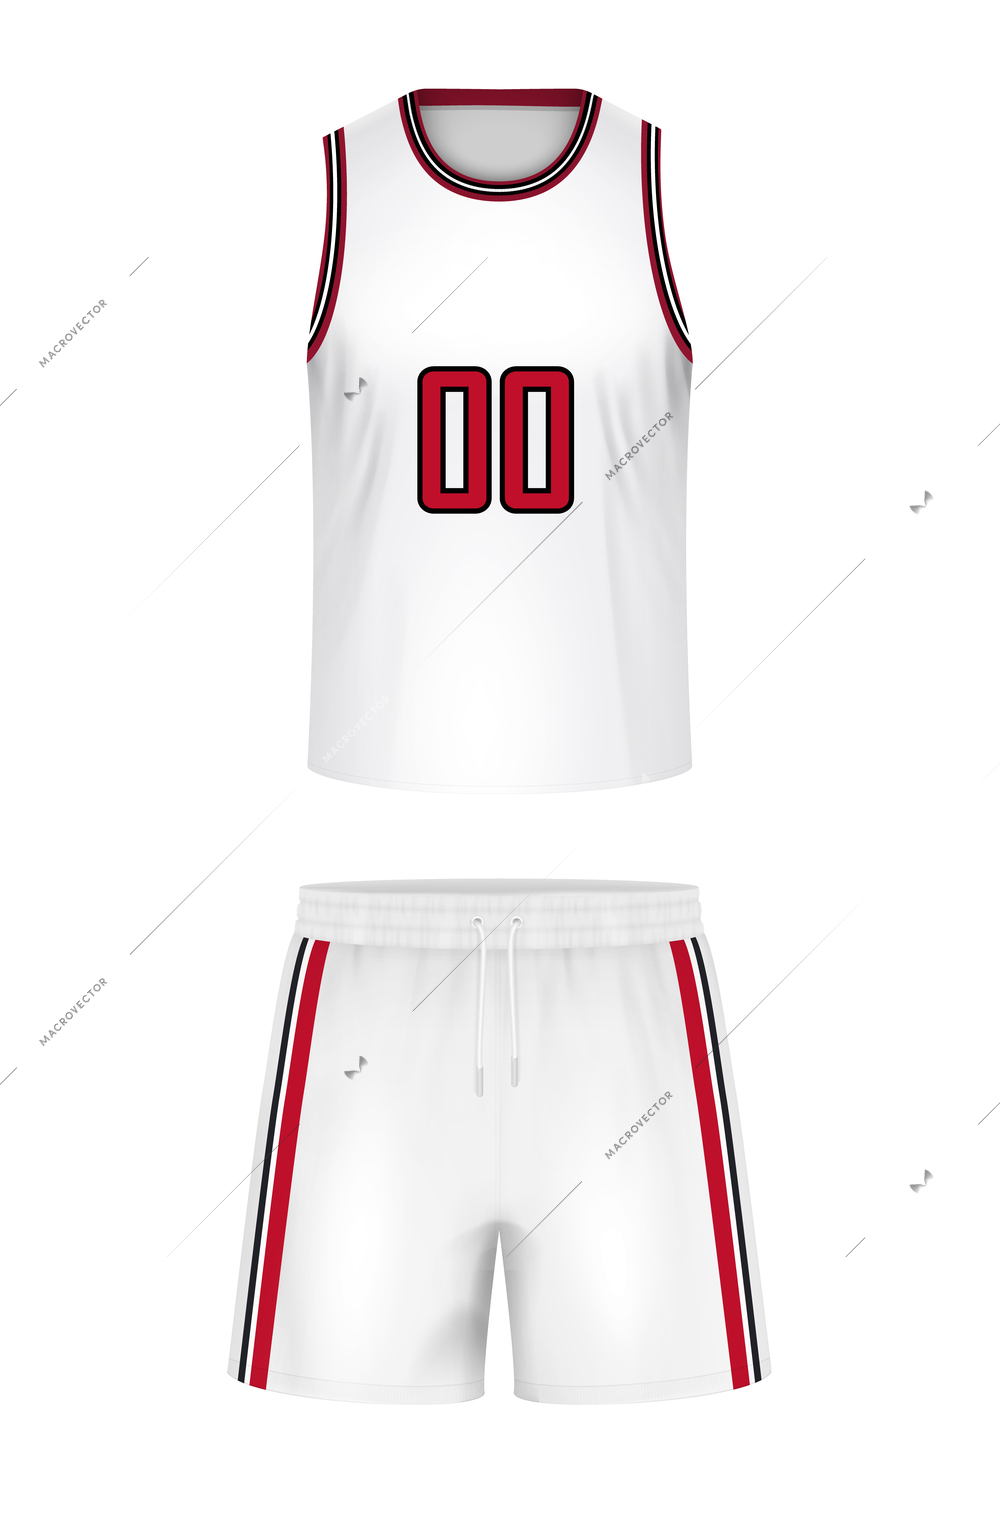 Basketball uniform realistic mockup  including tee shirt and shorts isolated on white background vector illustration